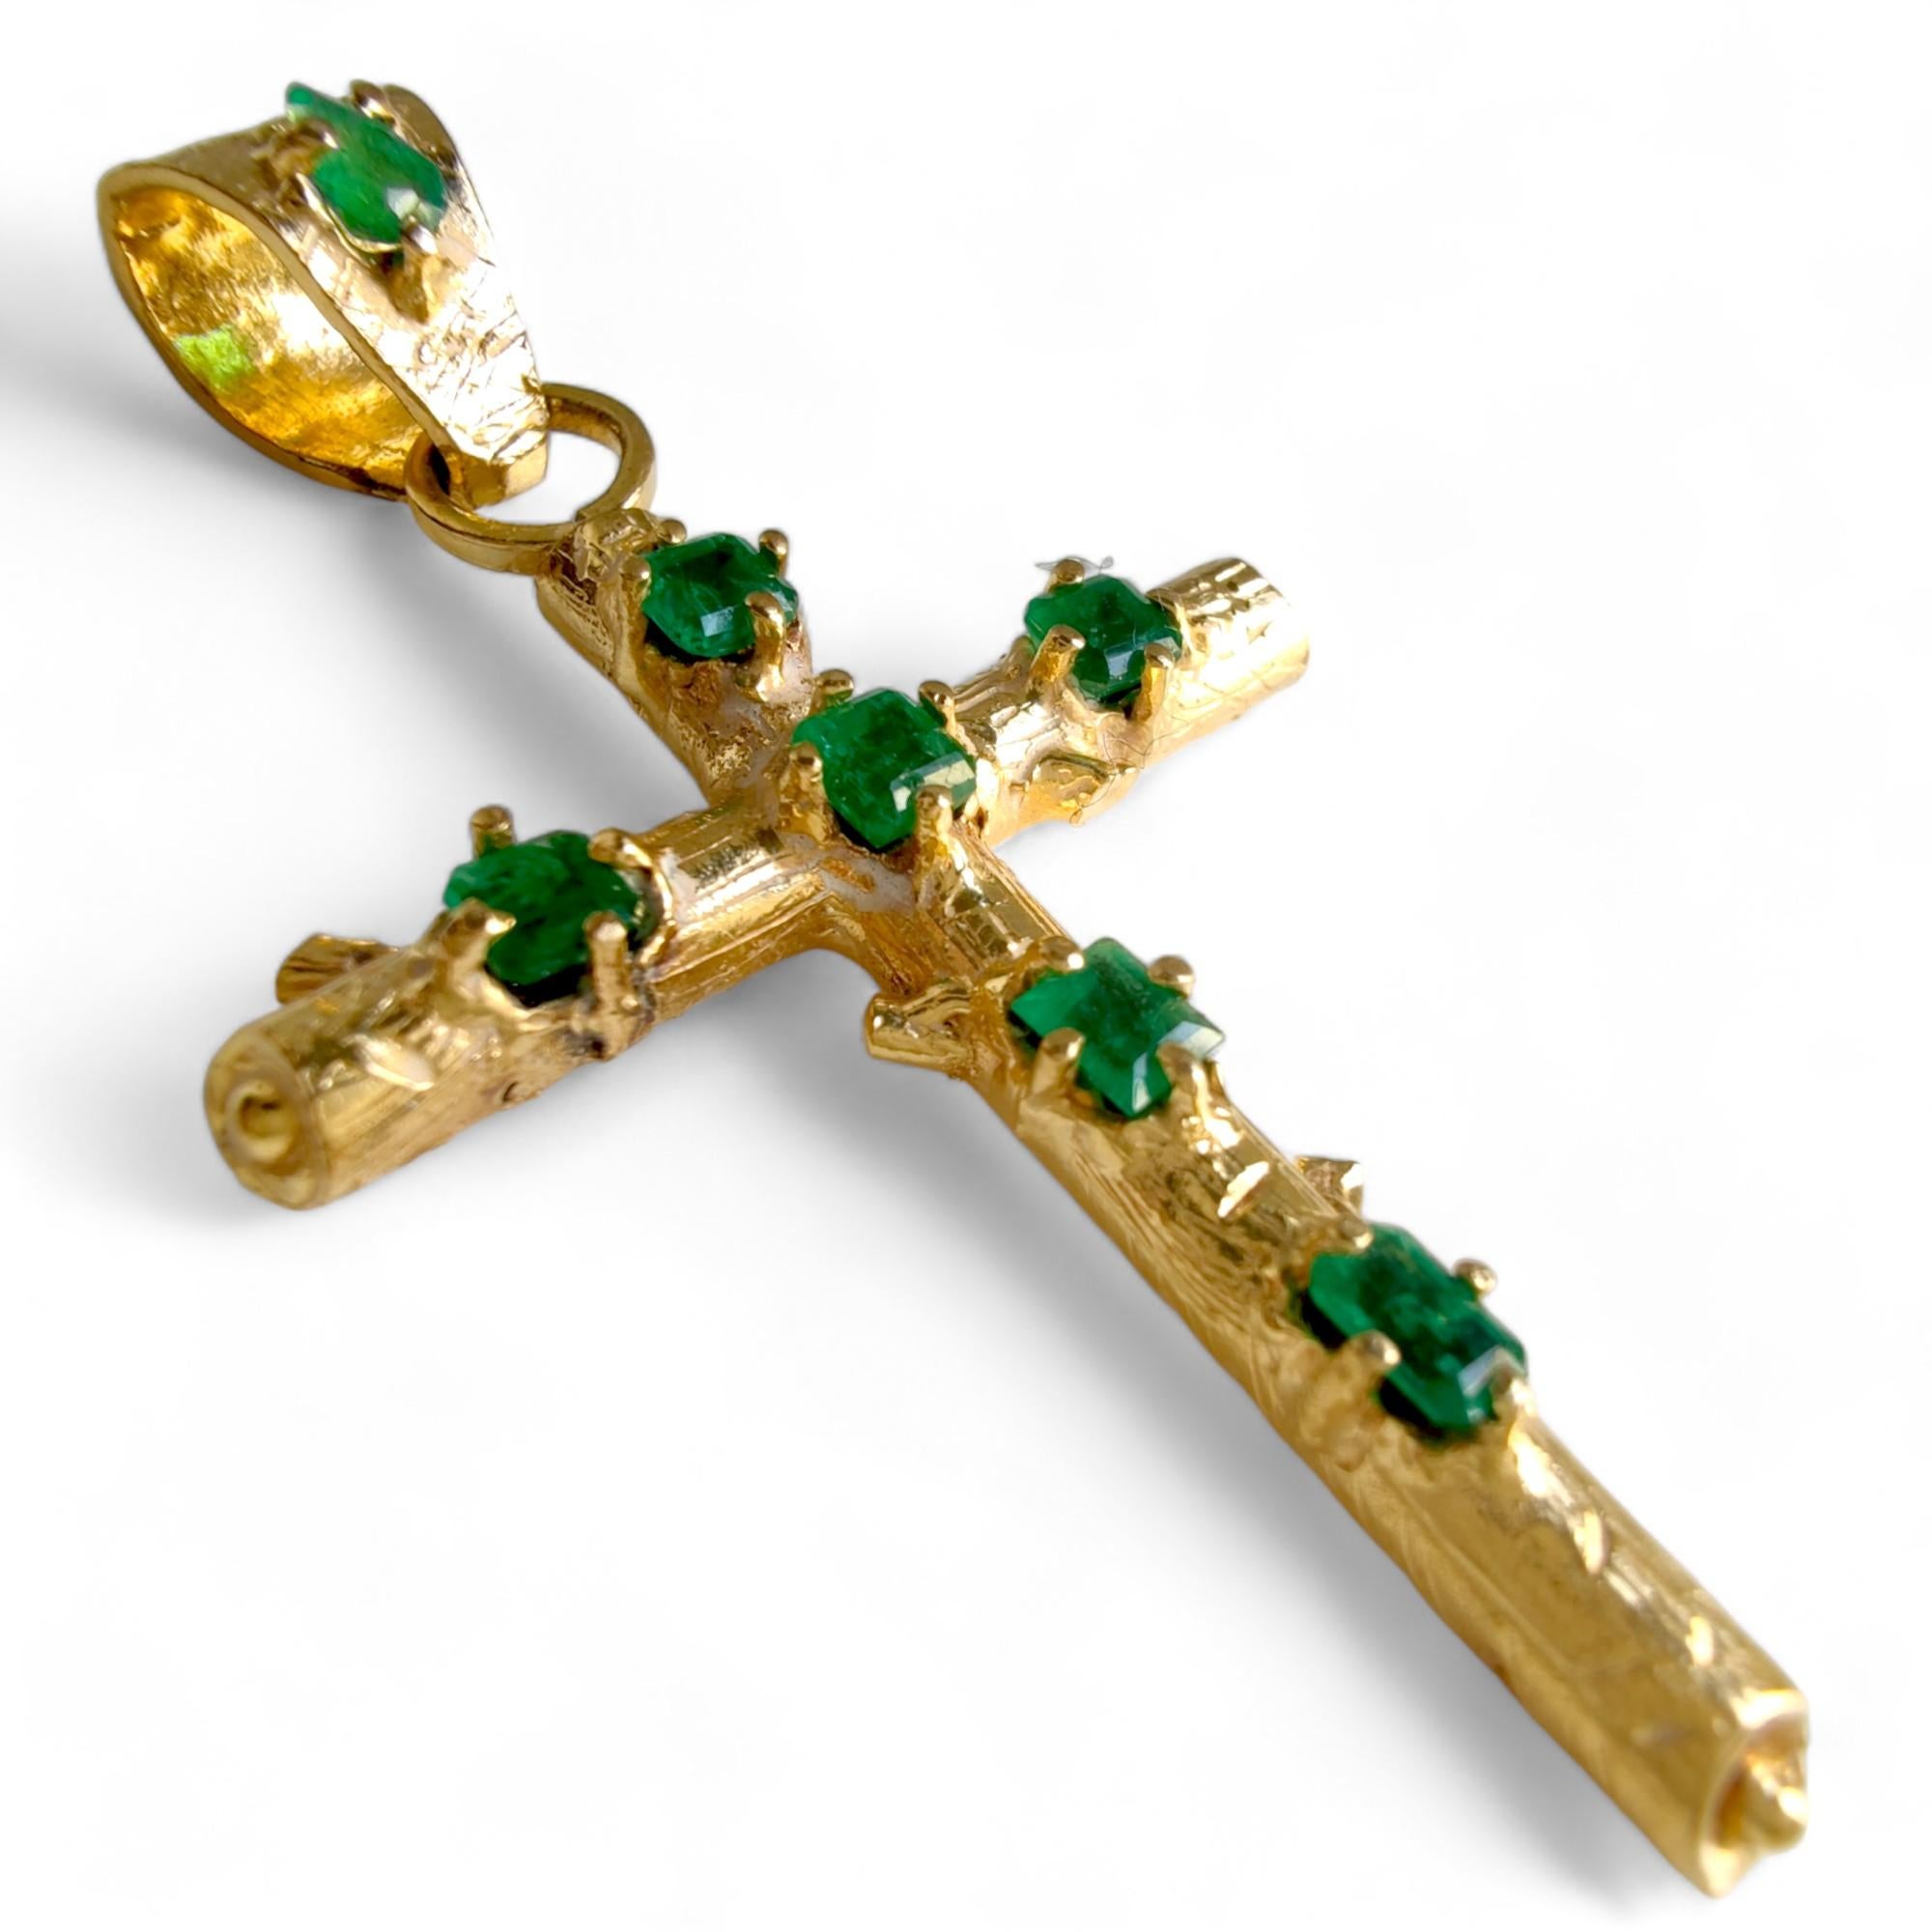 Contemporary 18K Yellow Gold Handmade Cross Pendant with  2.04 ct Emeralds - Unique Jewel For Sale